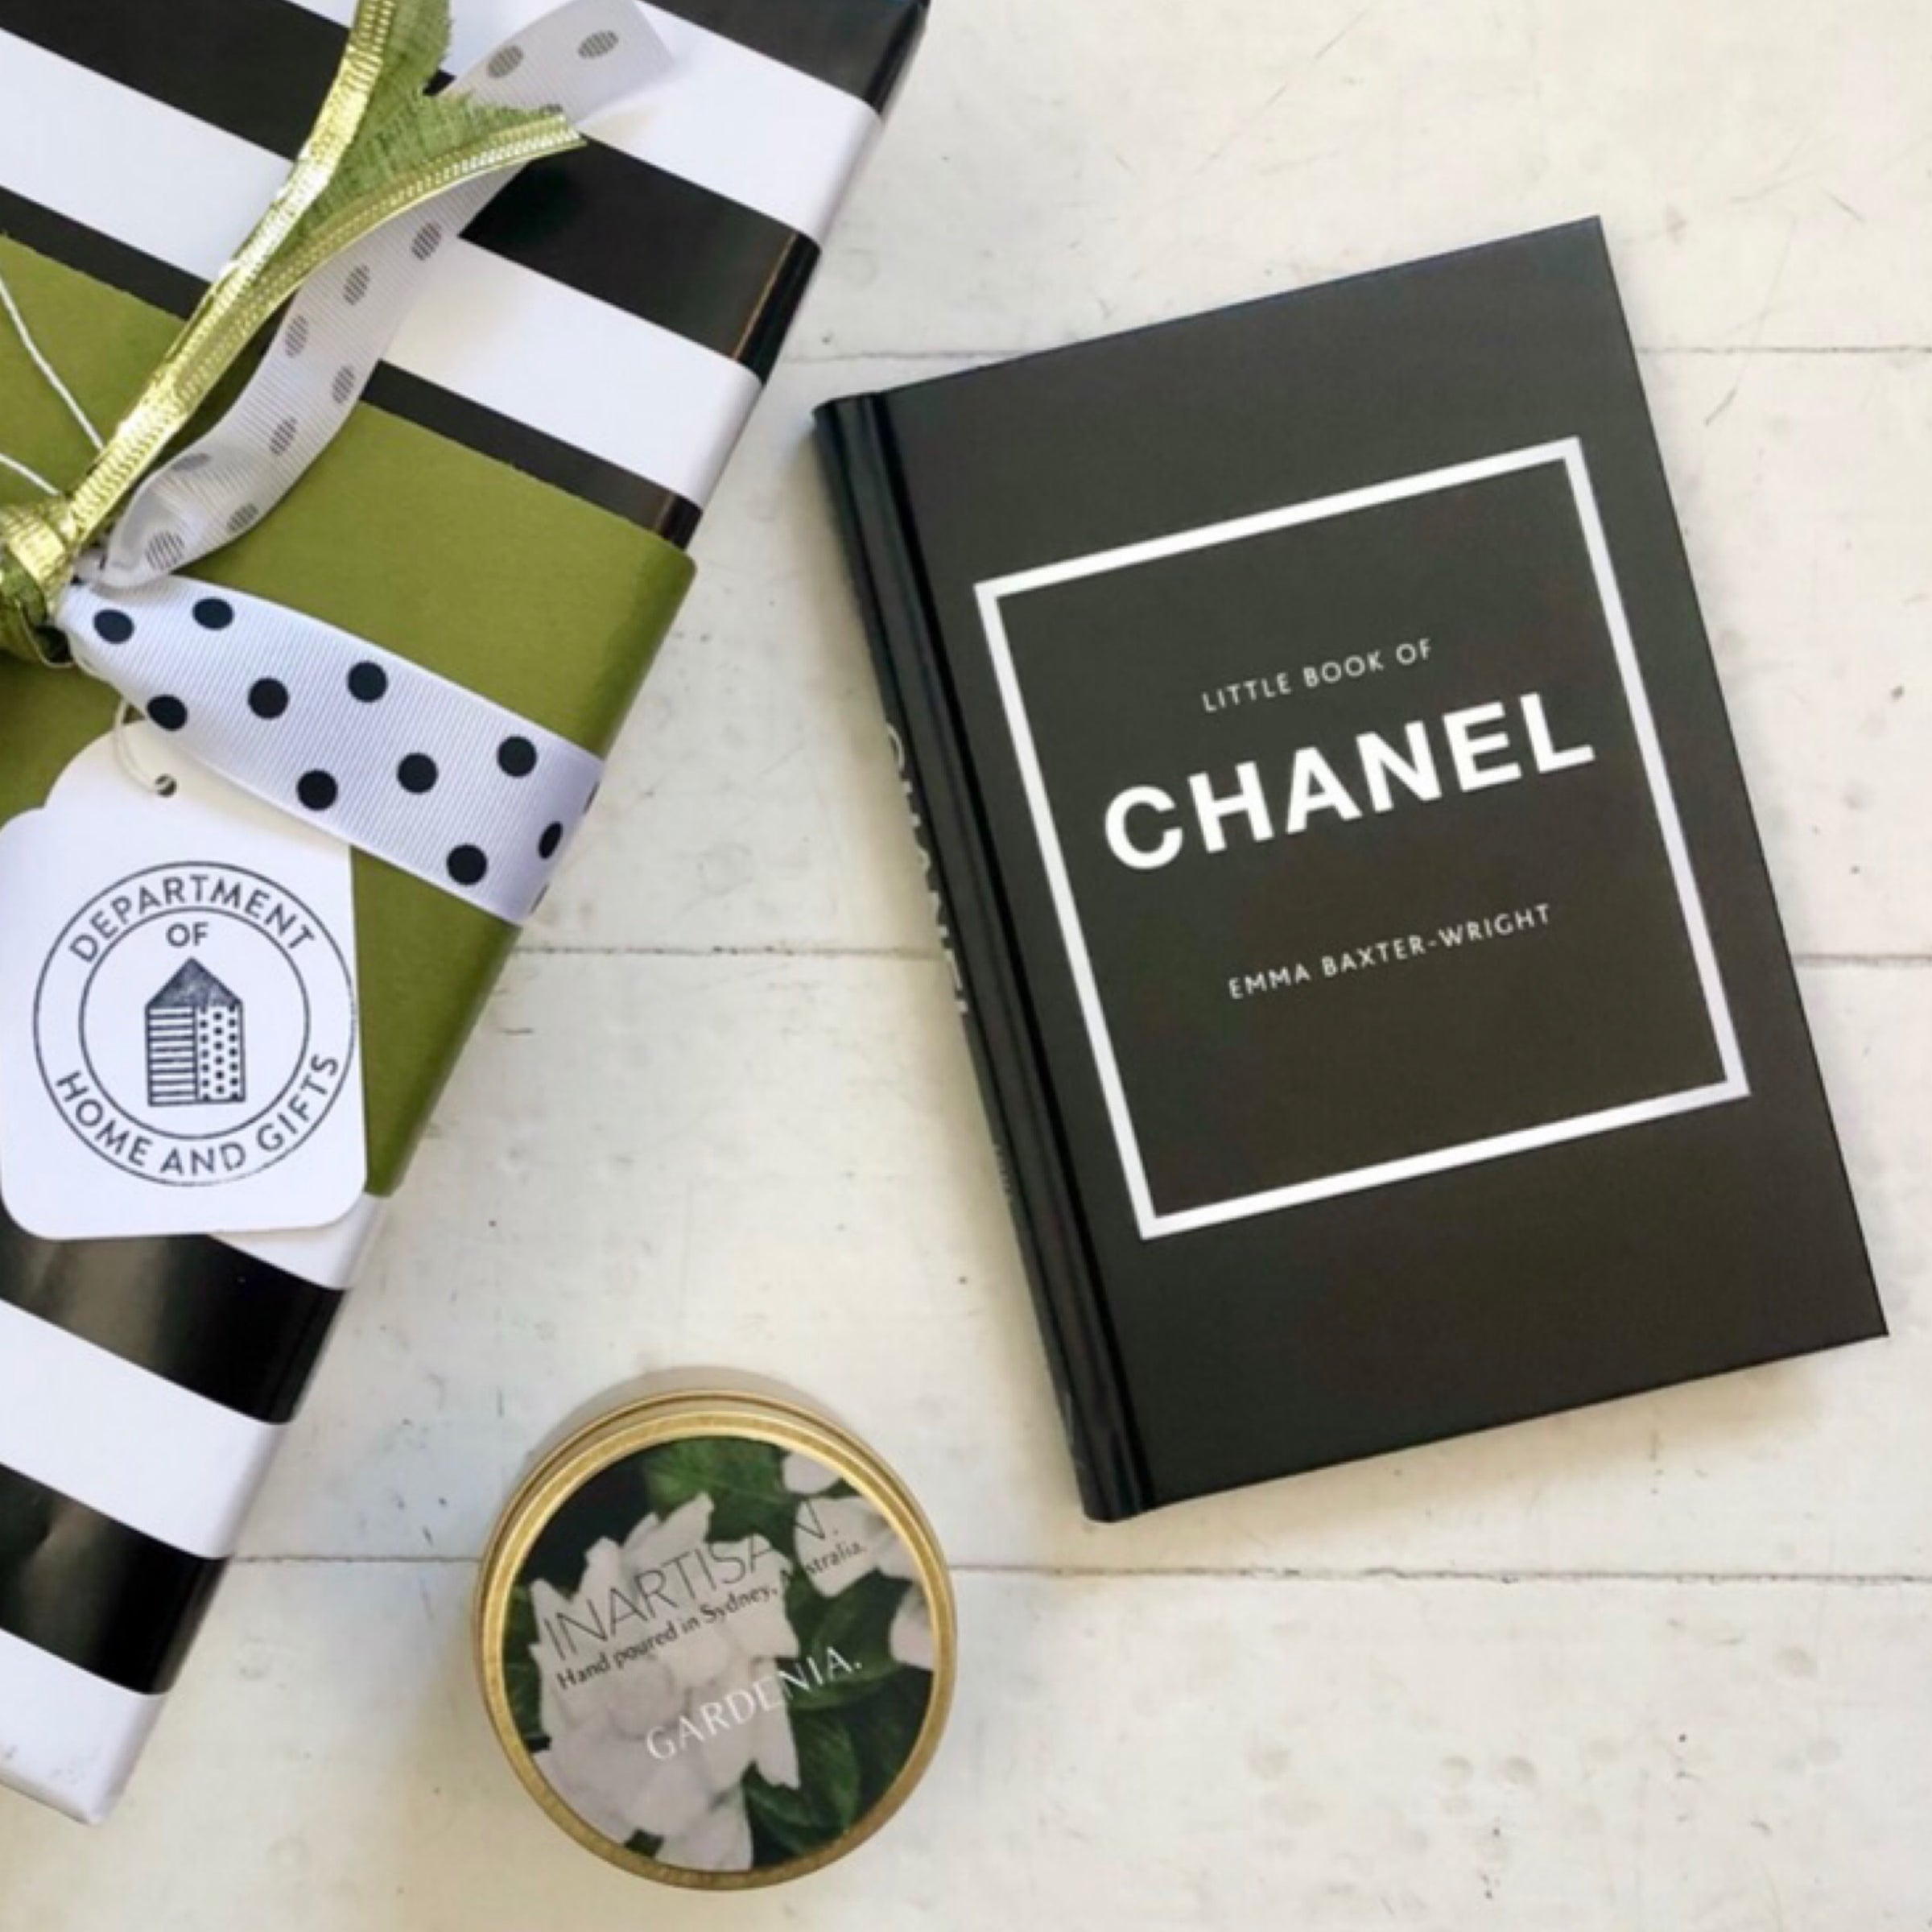 The Little Book of Chanel: New Edition Baxter-Wright, Emma PREMIUM LEATHER  BOUND